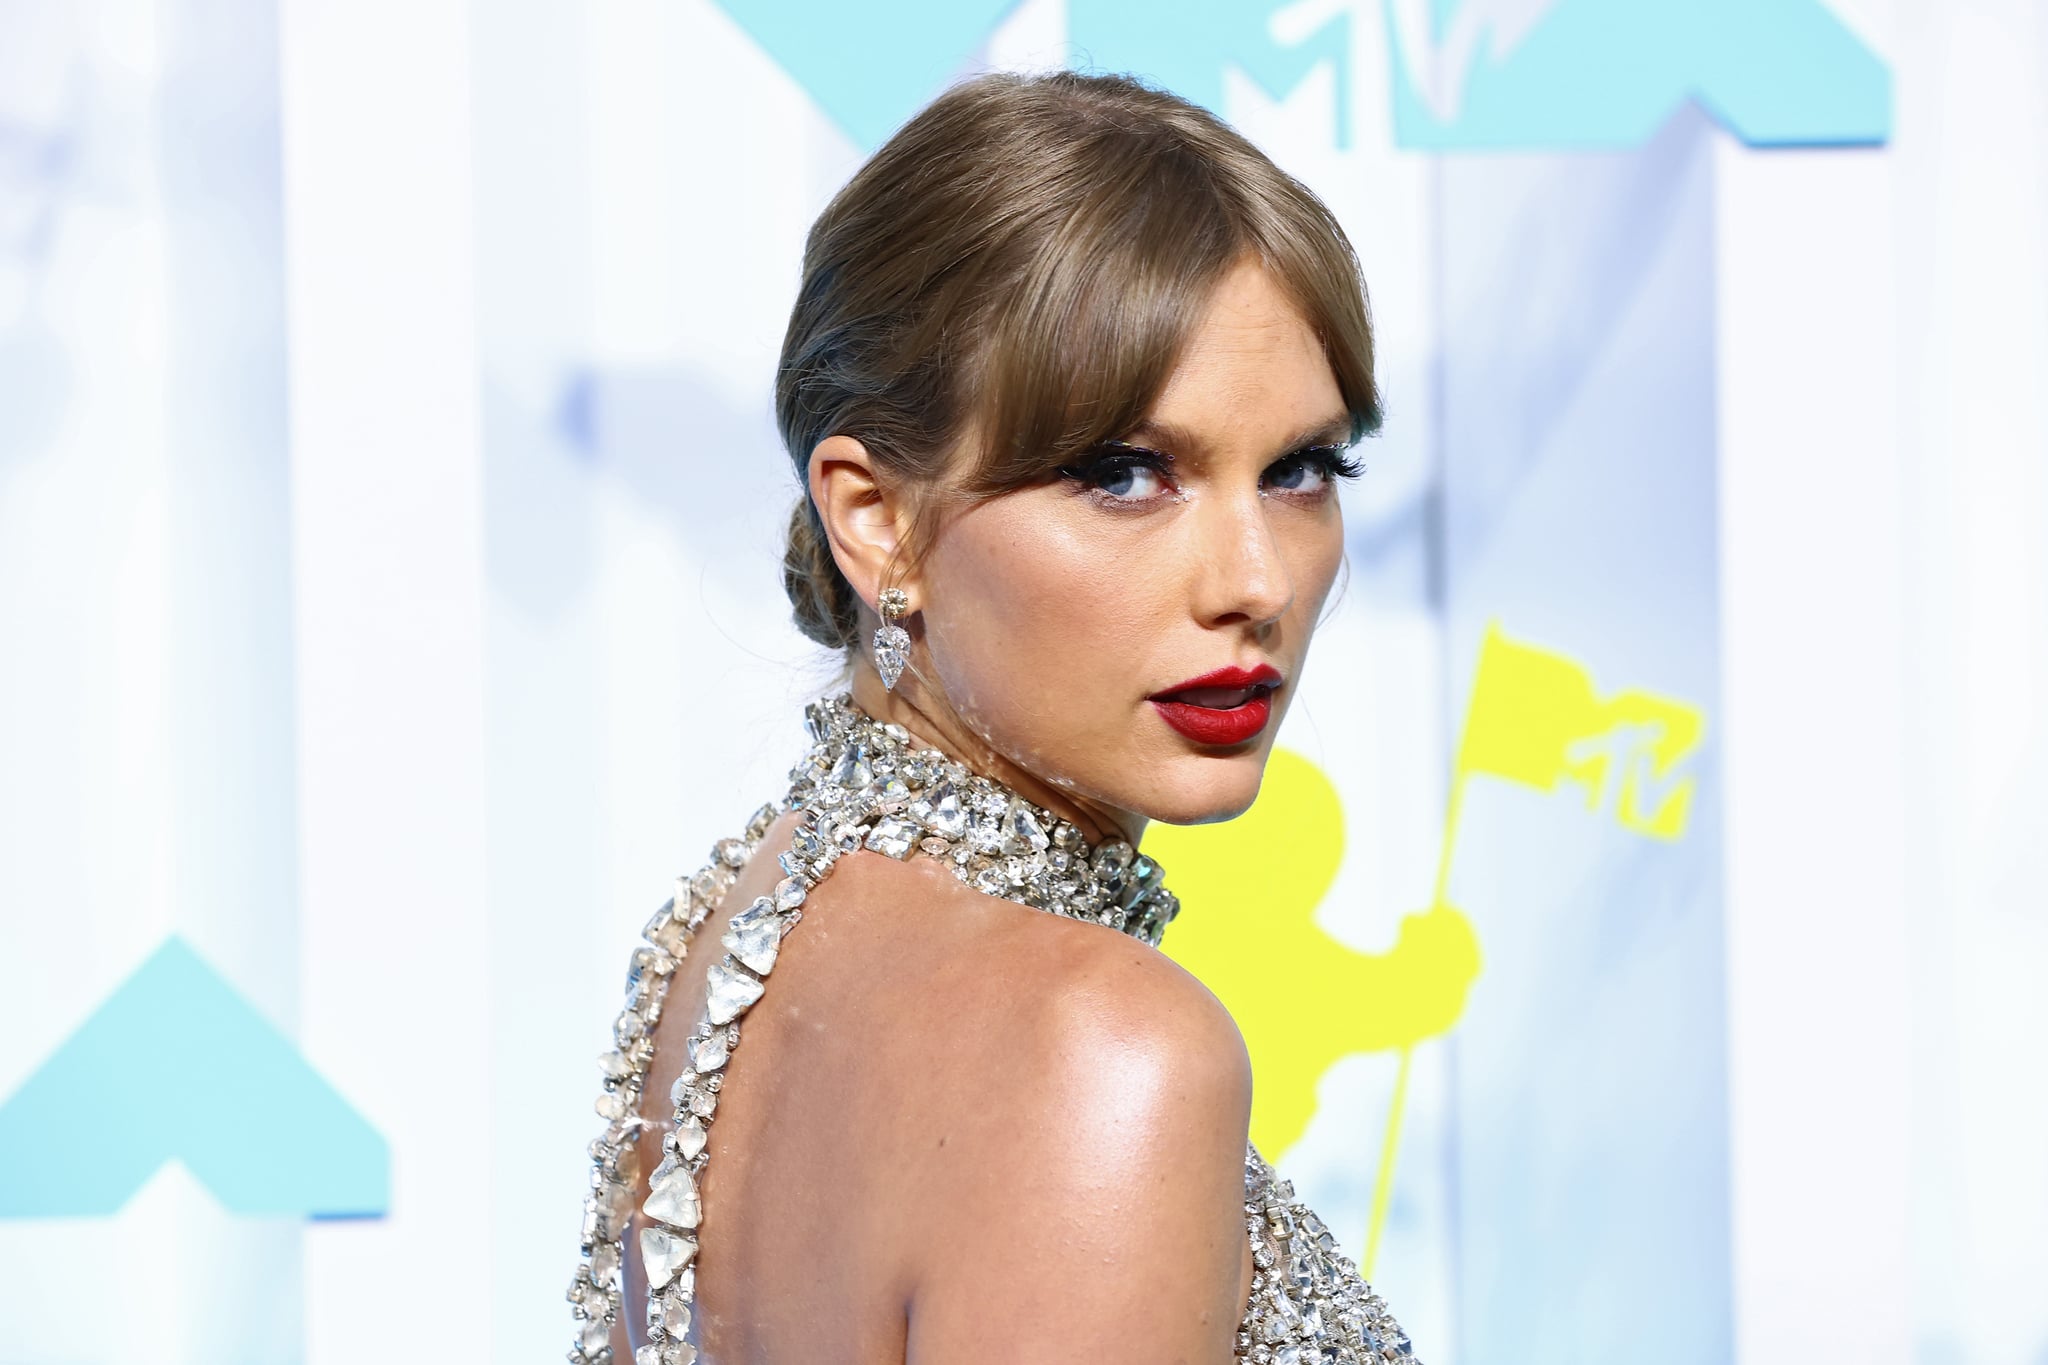 NEWARK, NEW JERSEY - AUGUST 28: Taylor Swift attends the 2022 MTV VMAs at Prudential Center on August 28, 2022 in Newark, New Jersey. (Photo by Arturo Holmes/FilmMagic)